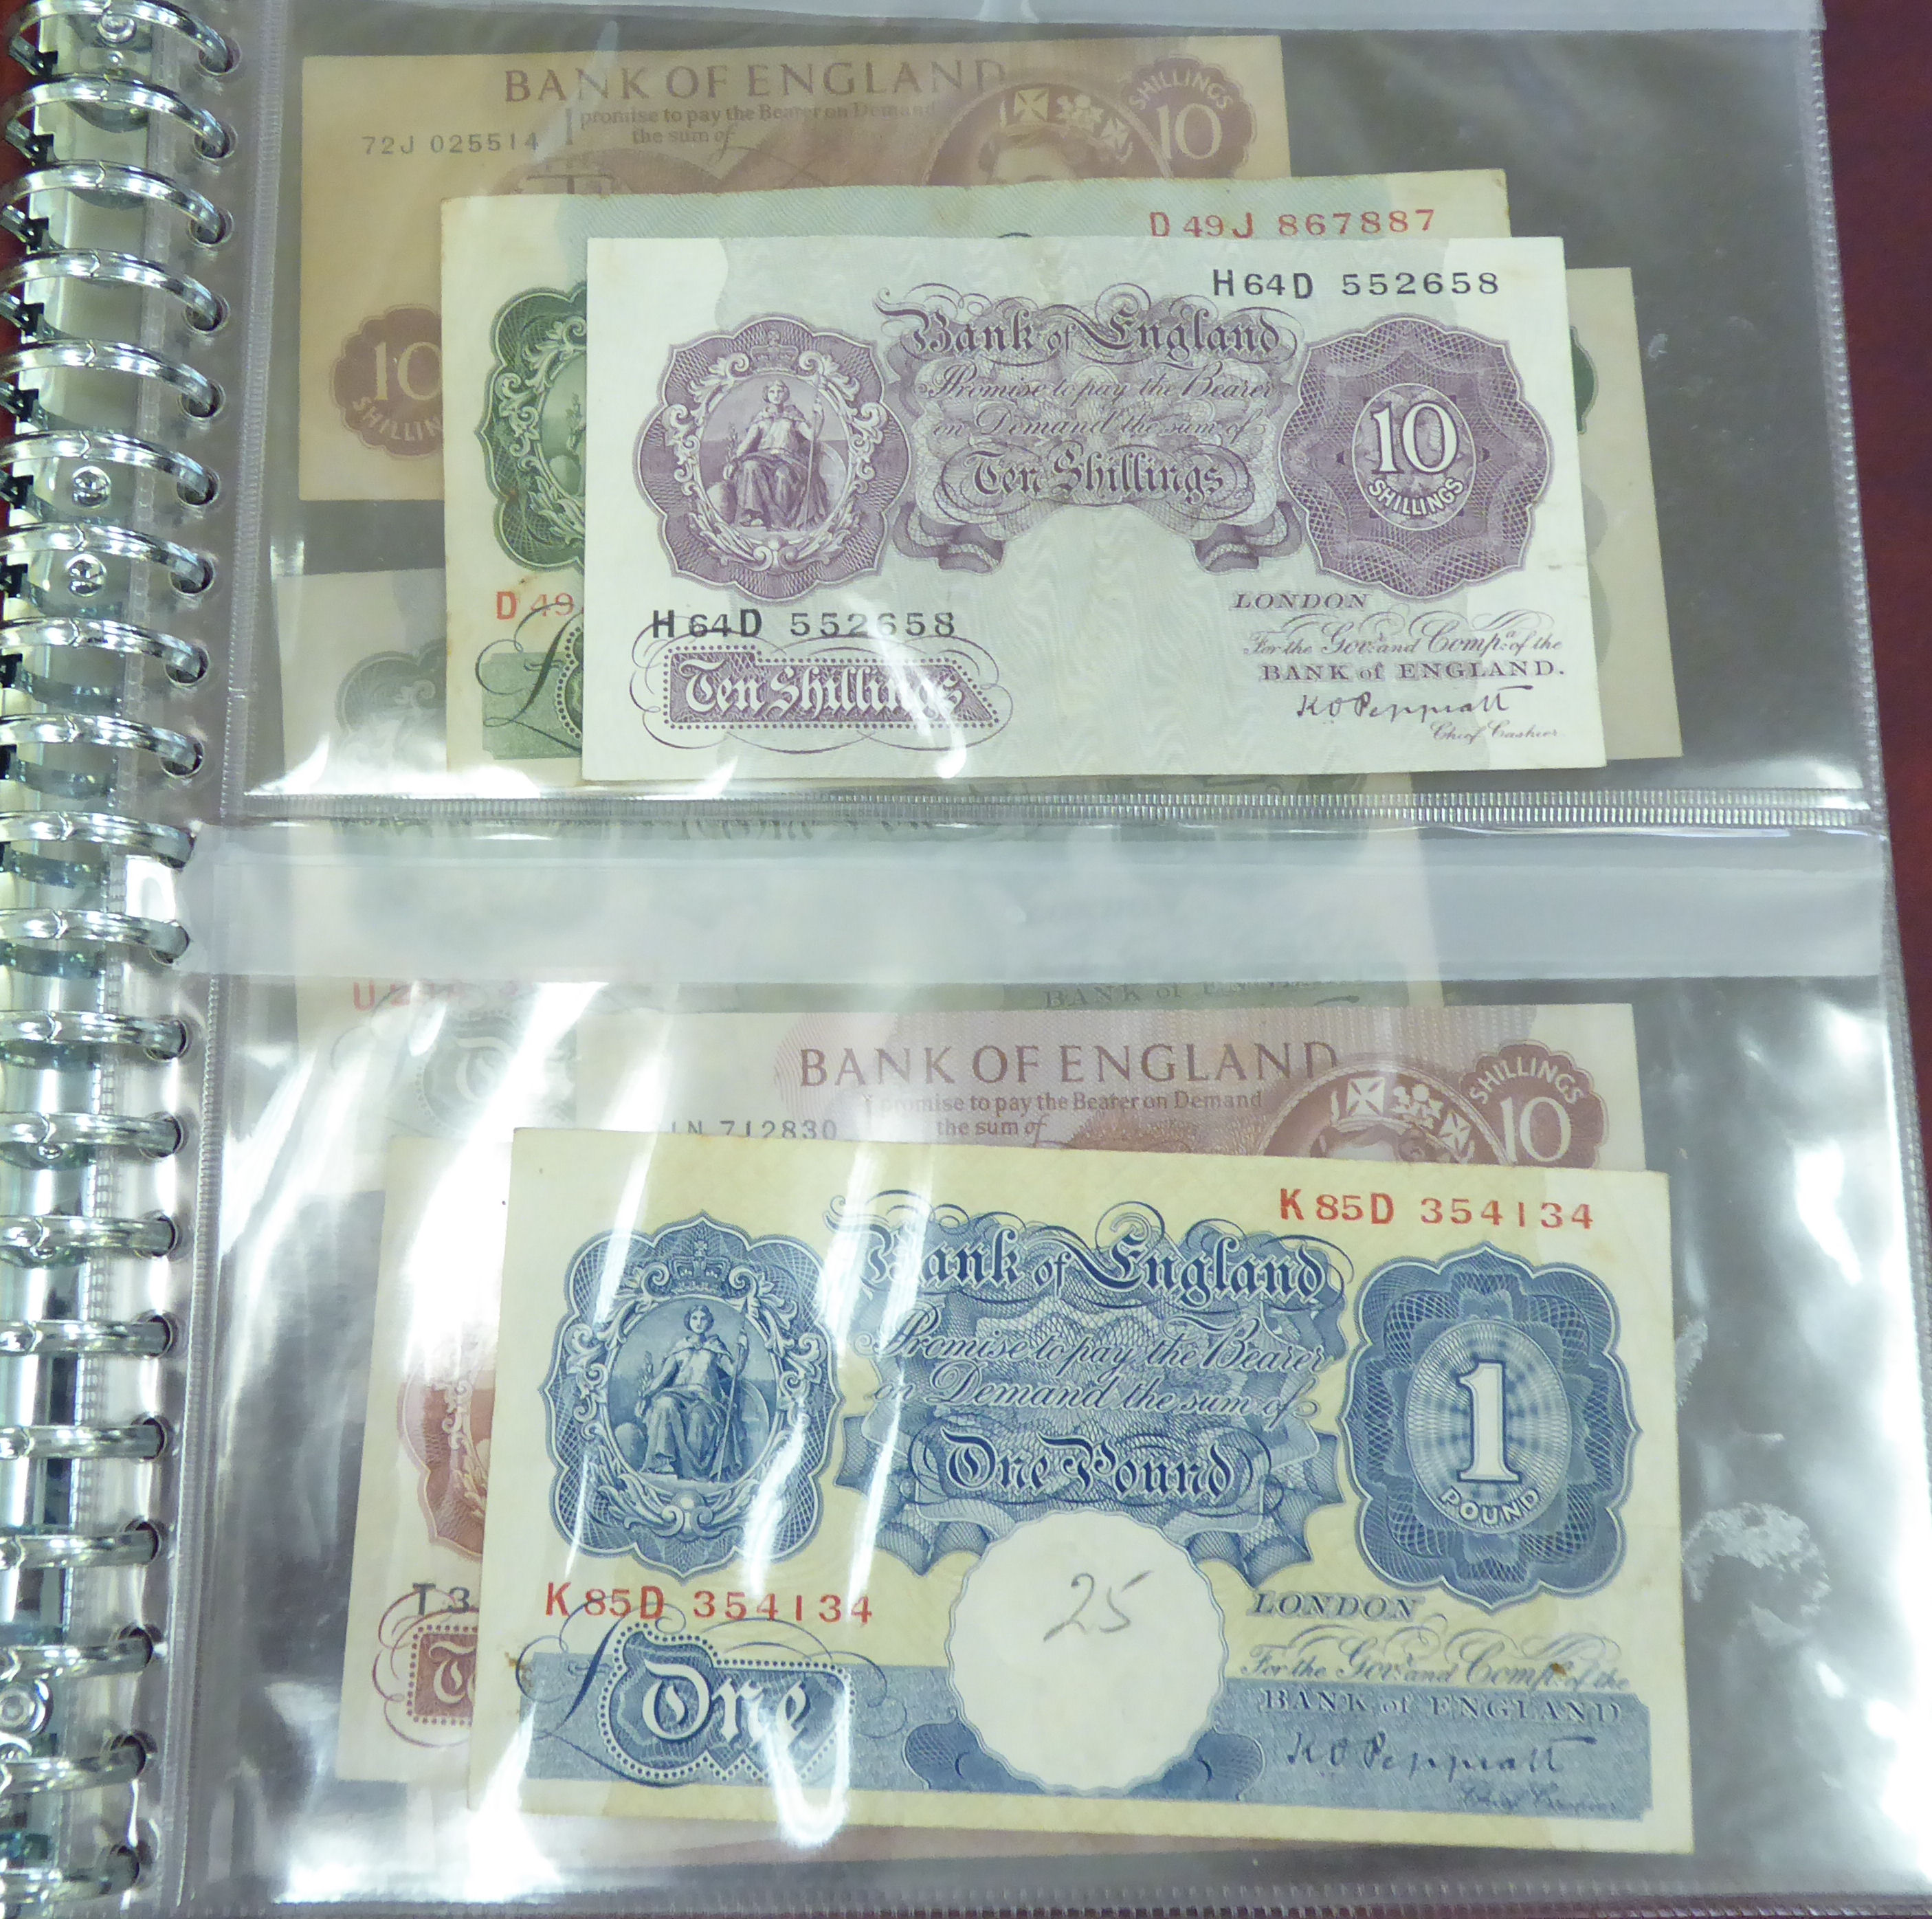 Two uncollated albums collections, containing banknotes from Peru, Uruguay, Turkey, China, Brazil,